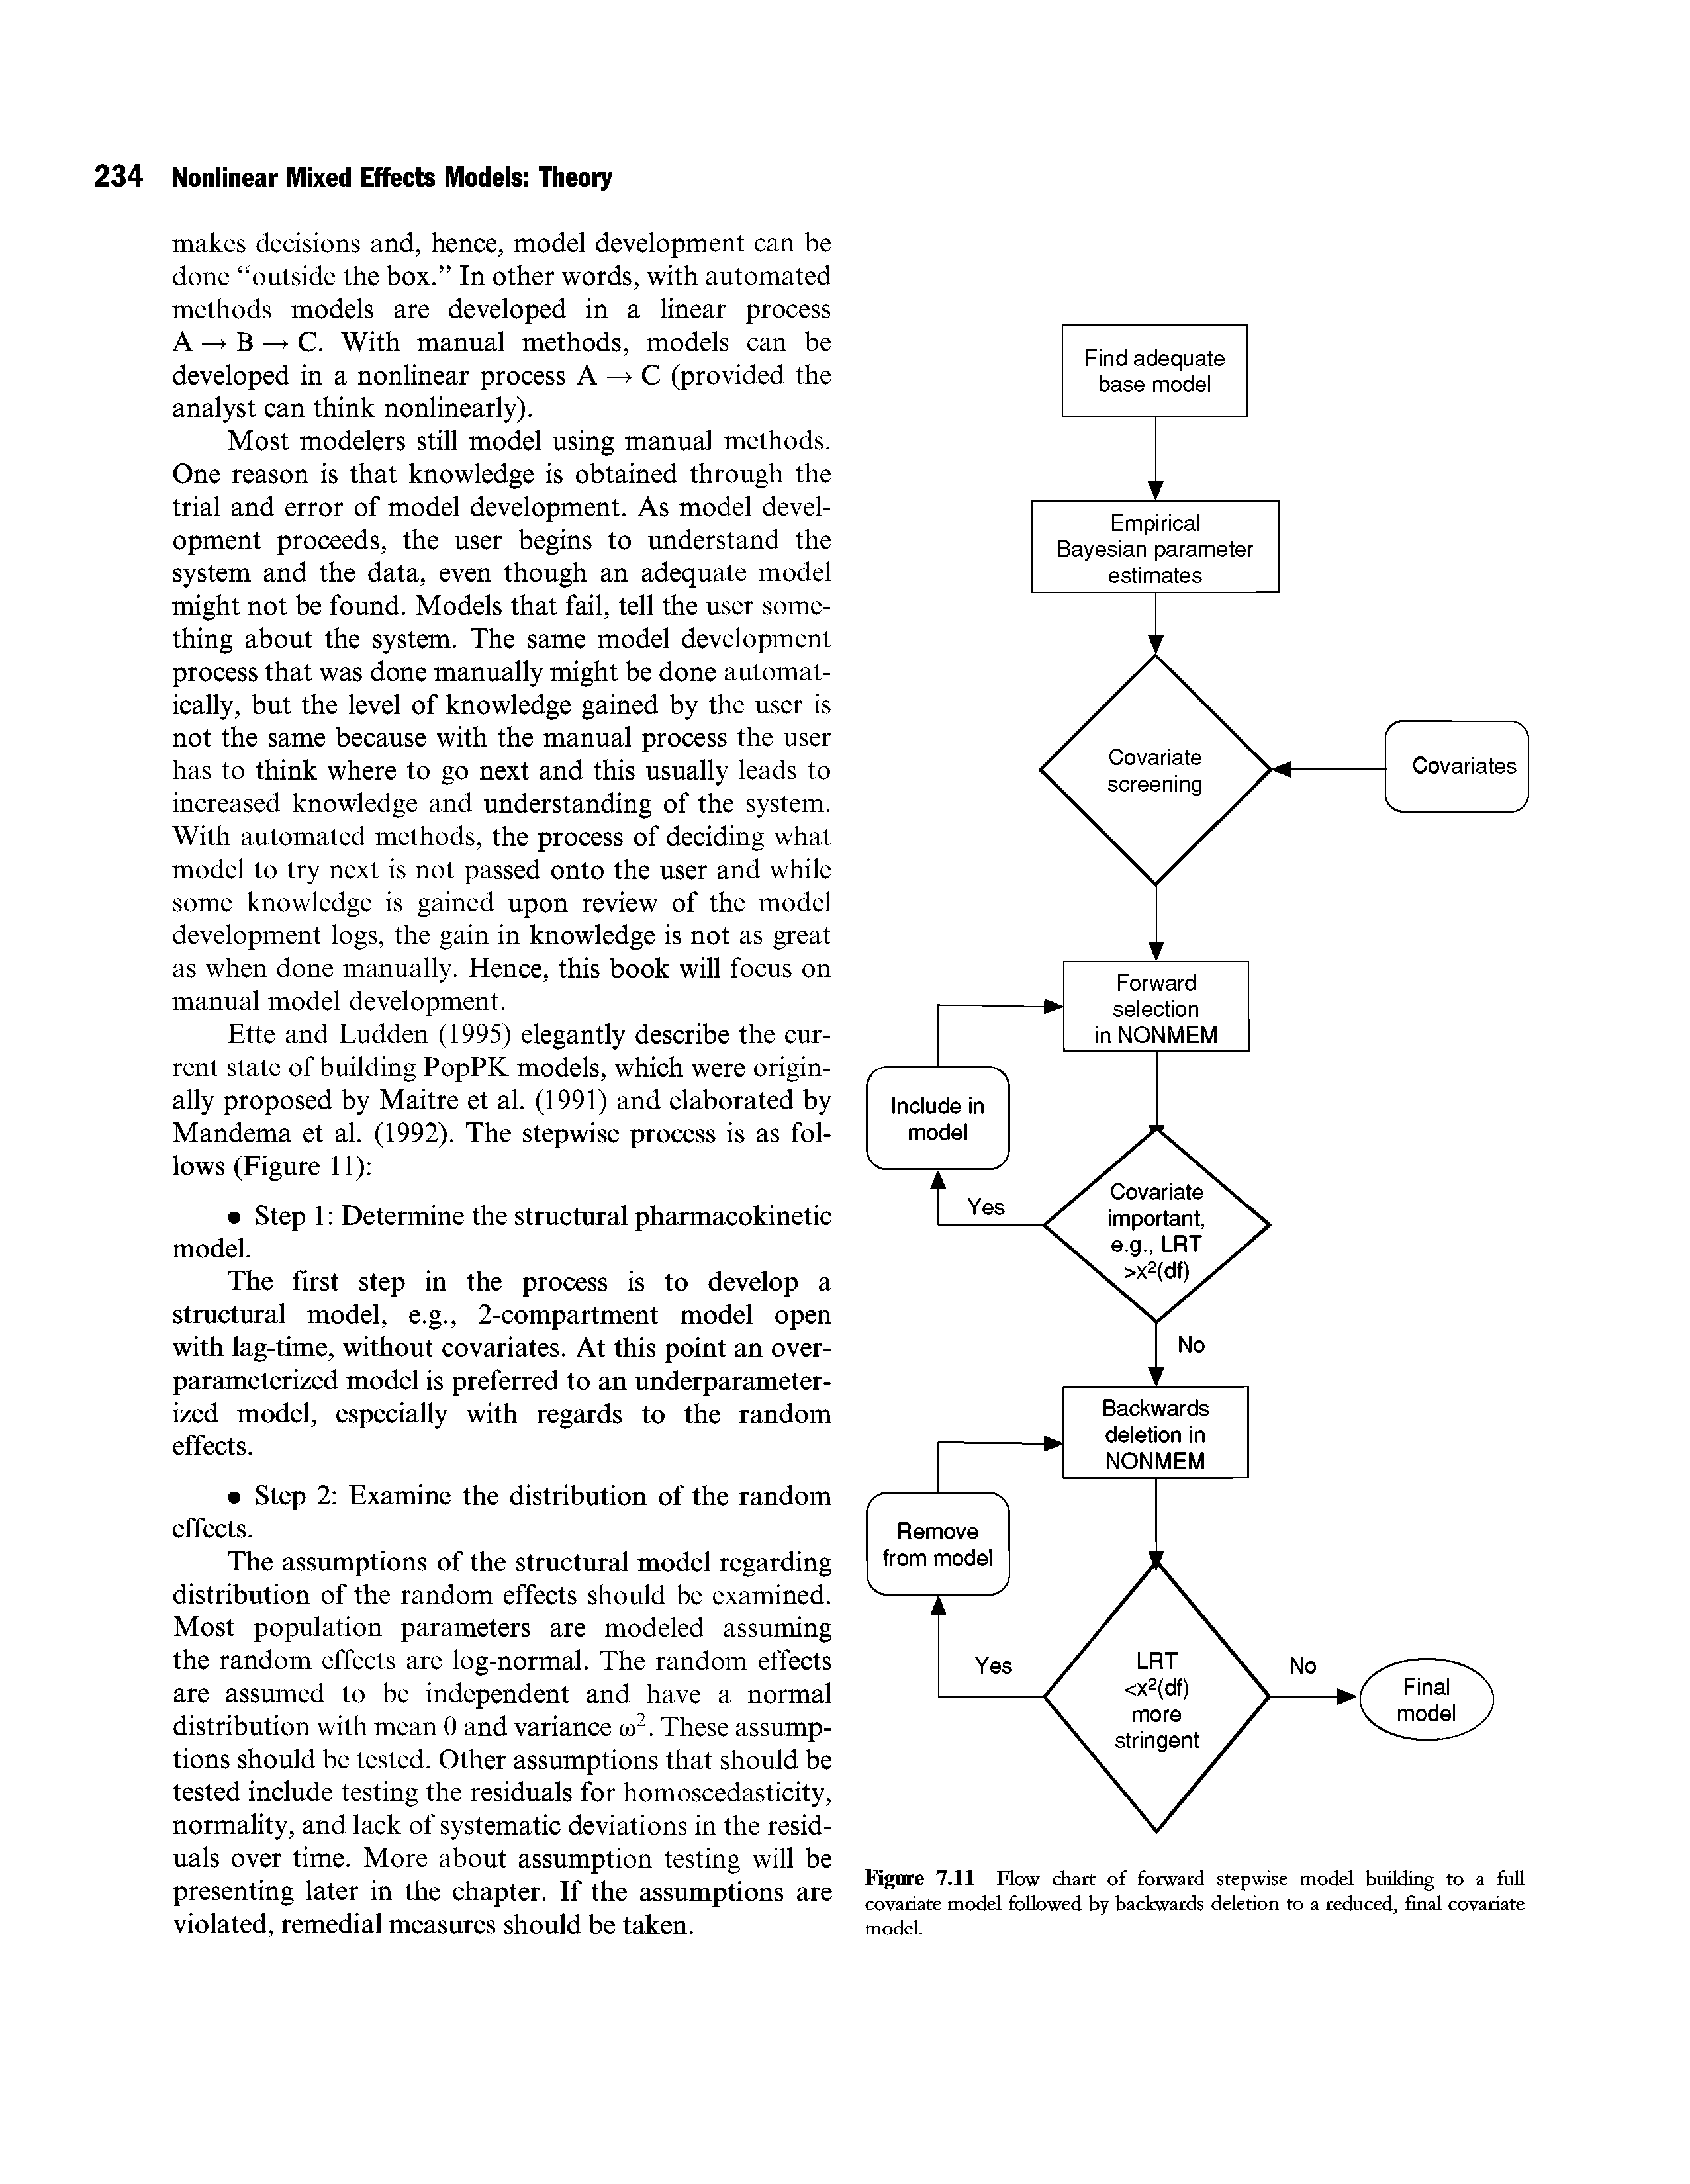 Figure 7.11 Flow chart of forward stepwise model building to a full covariate model followed by backwards deletion to a reduced, final covariate model.